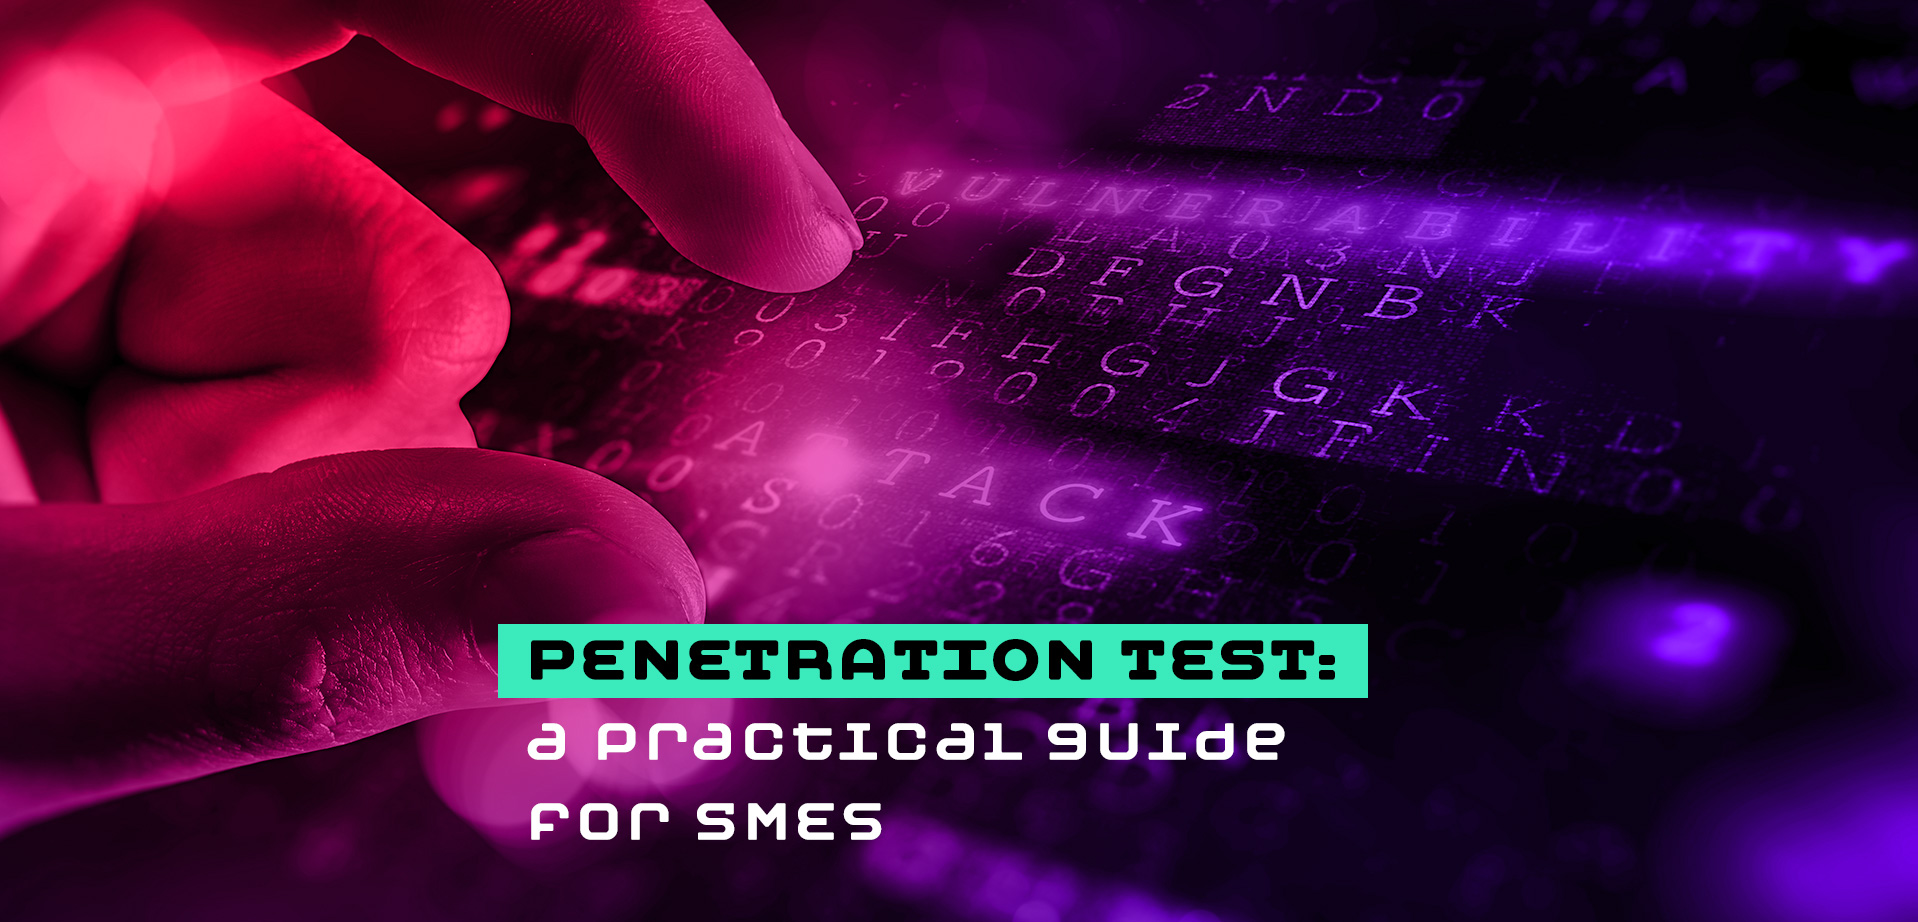 PENTEST-a practical guide for SMEs